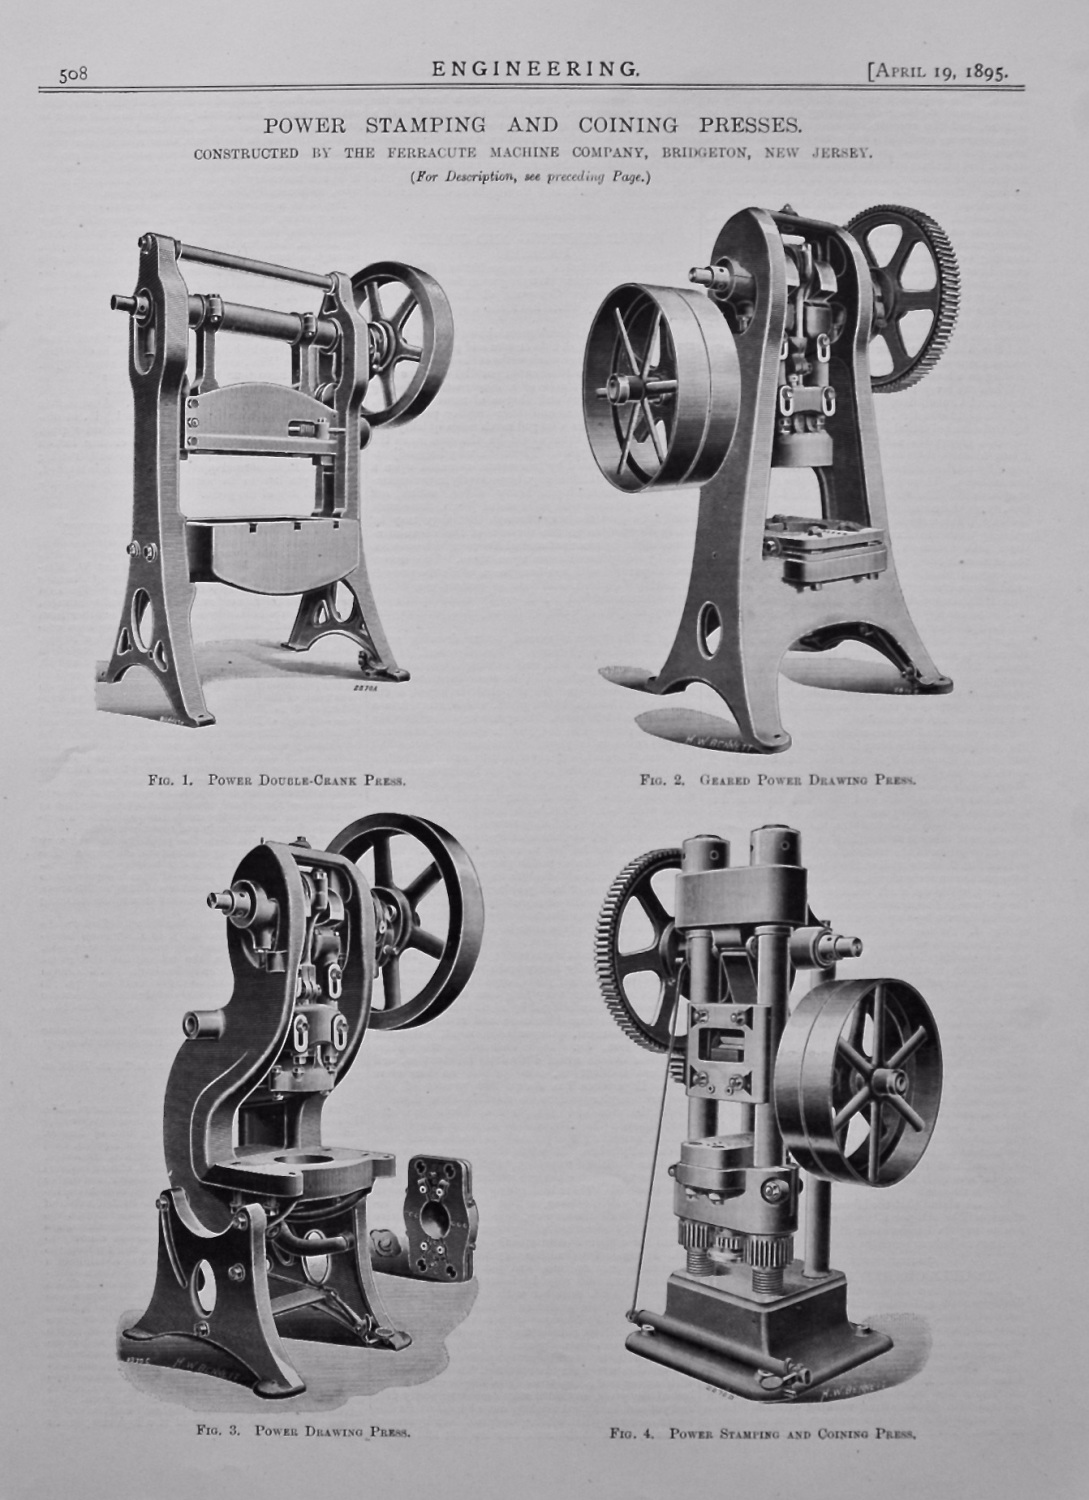 Power Stamping and Coining Presses. 1895.